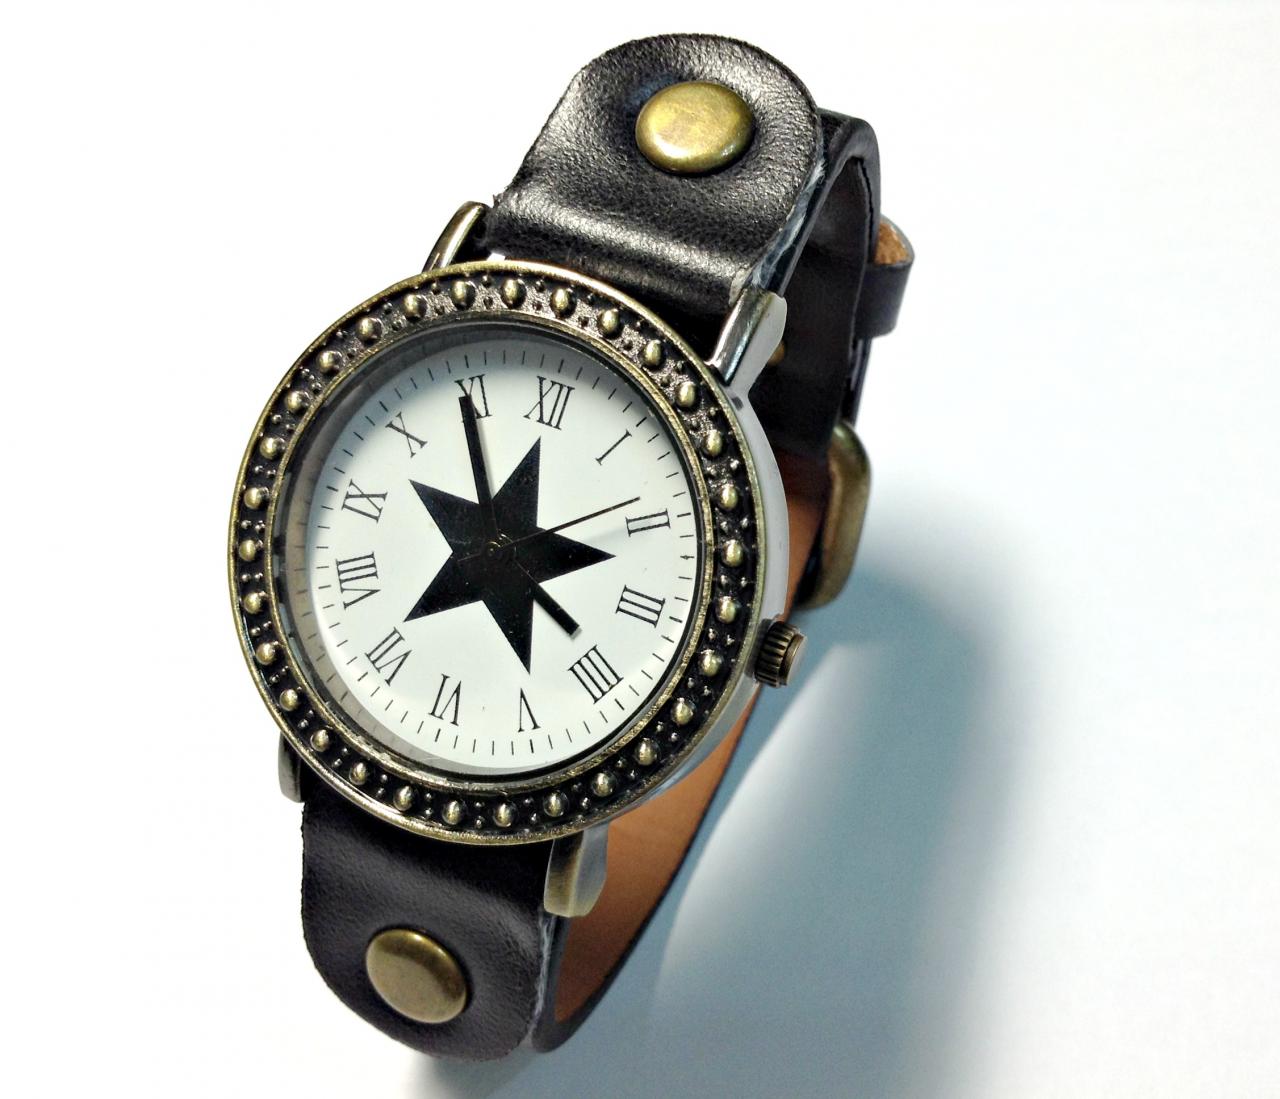 Vintage Star Face Leather Band Watches Woman Girl Quartz Wrist Watch Black